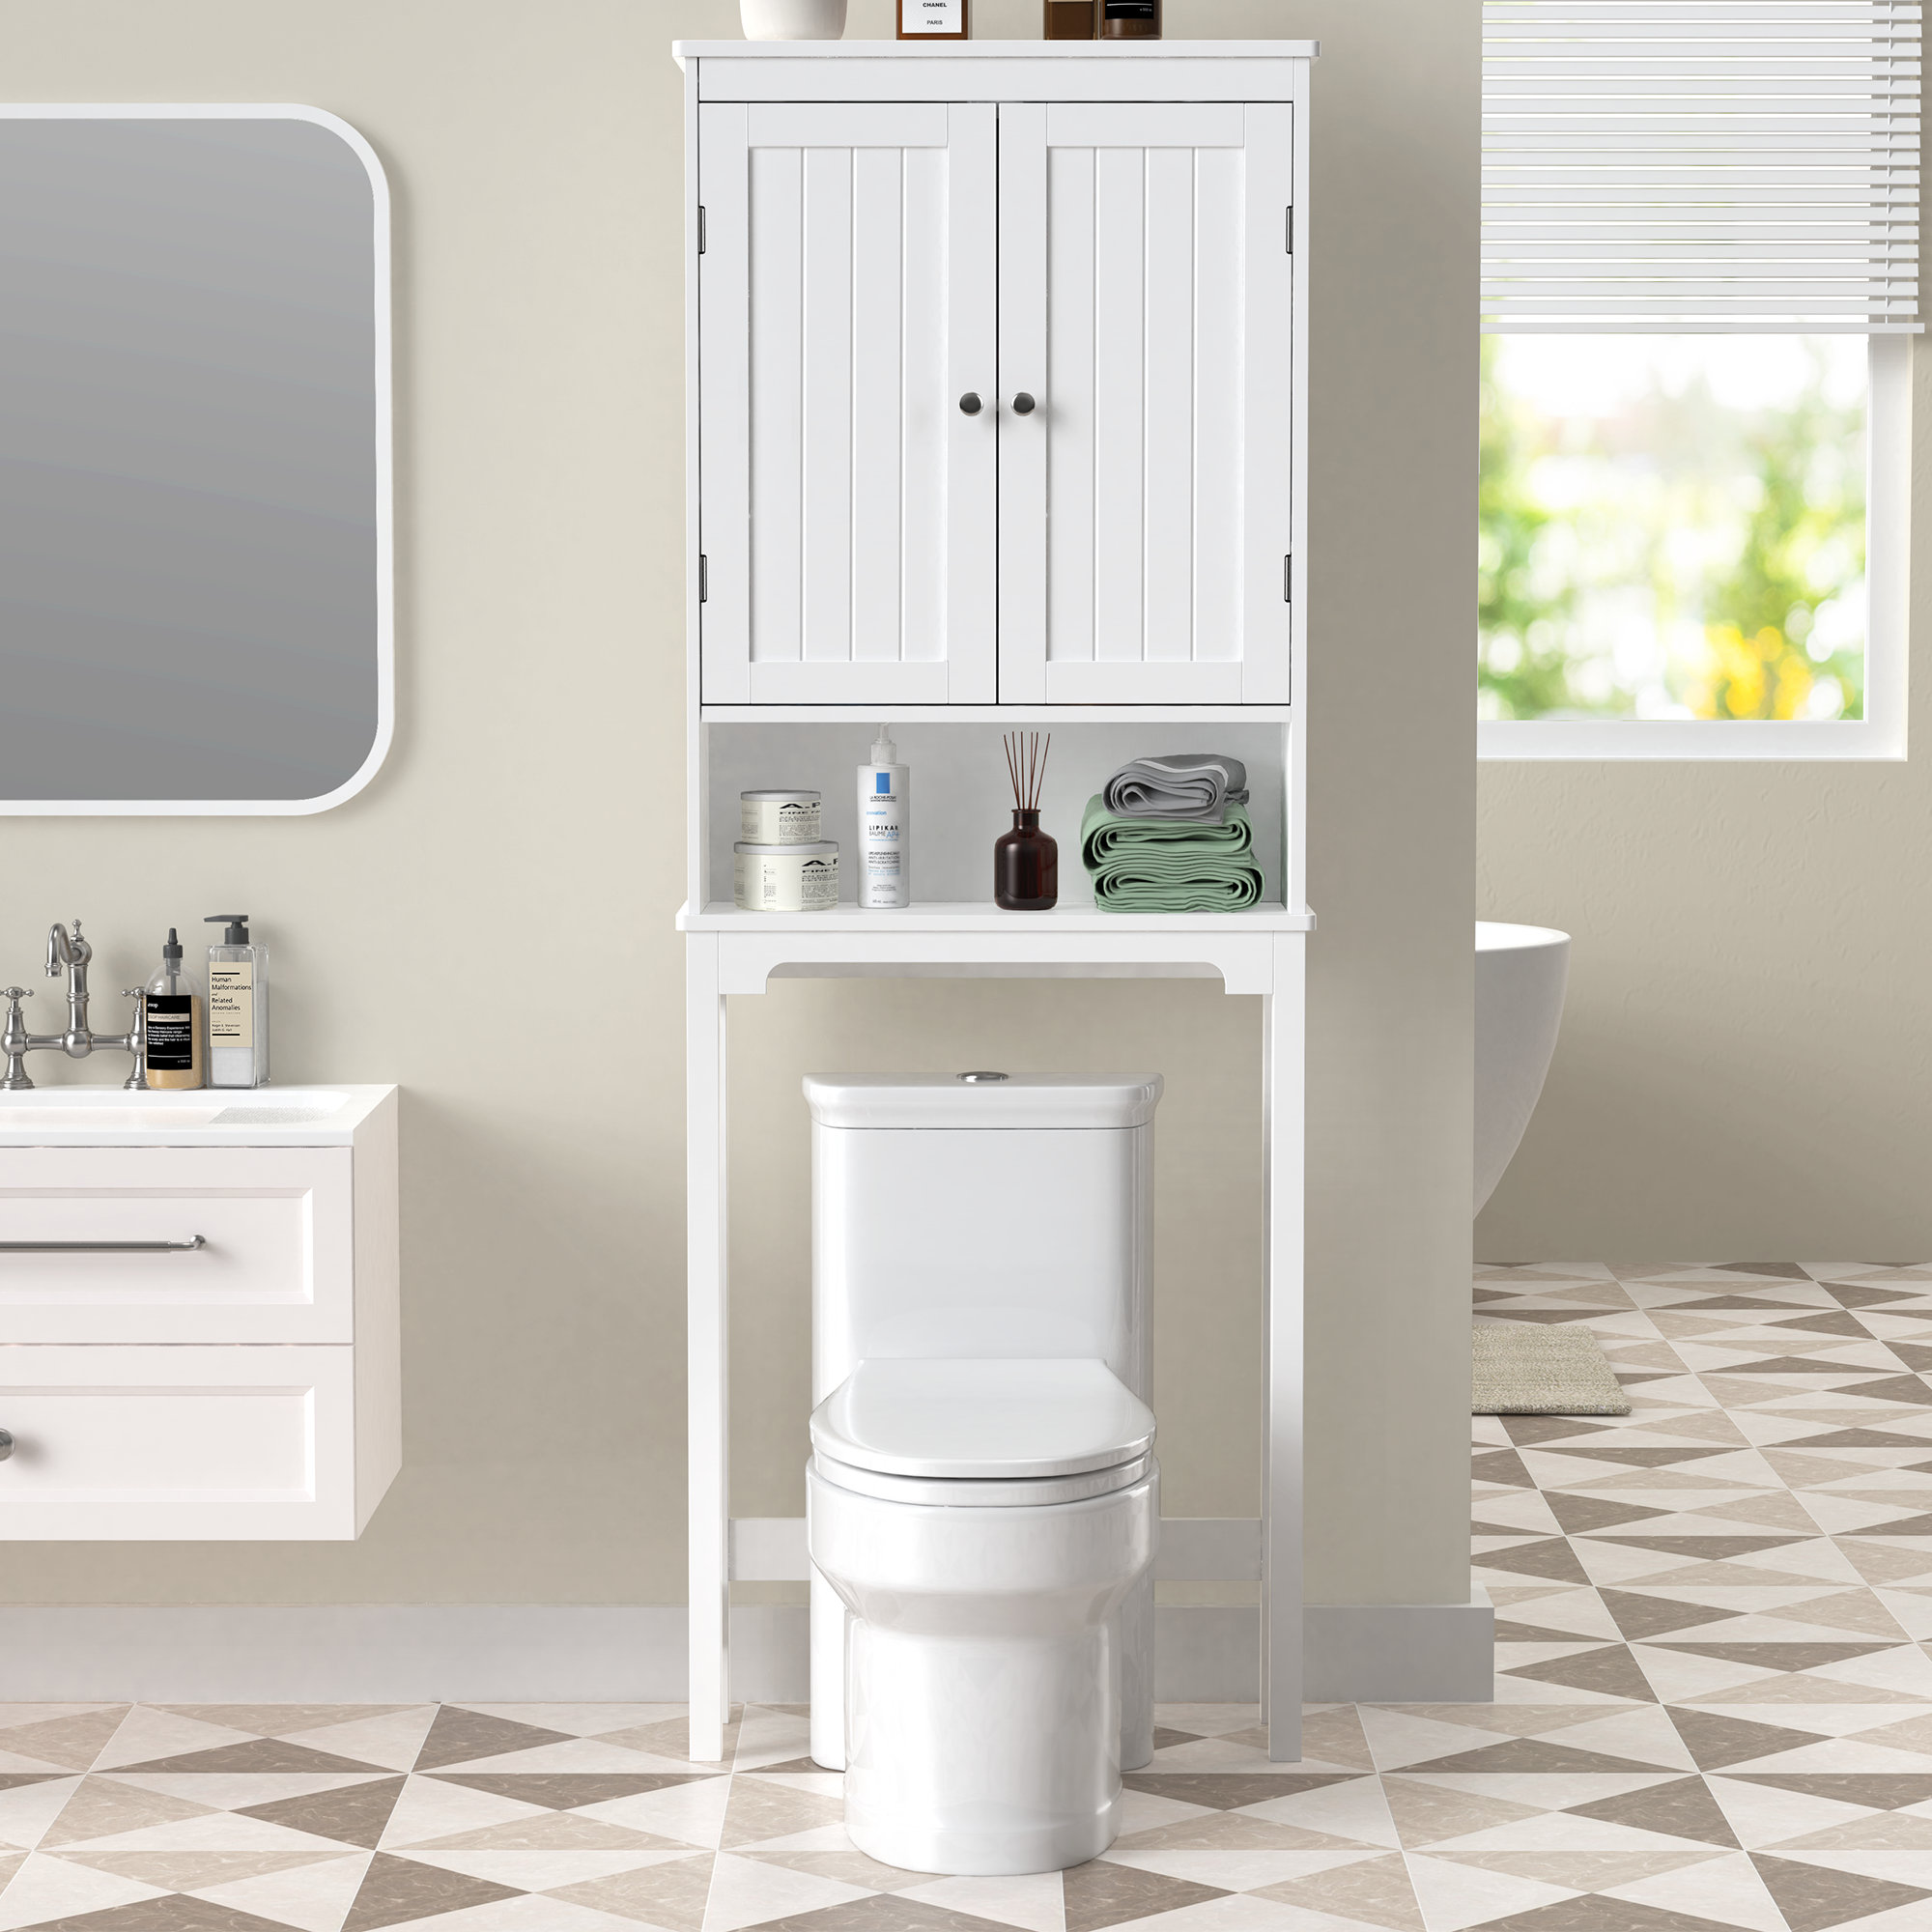 25 in. W x 77 in. H x 7.9 in. D Gray Bathroom Over-The-Toilet